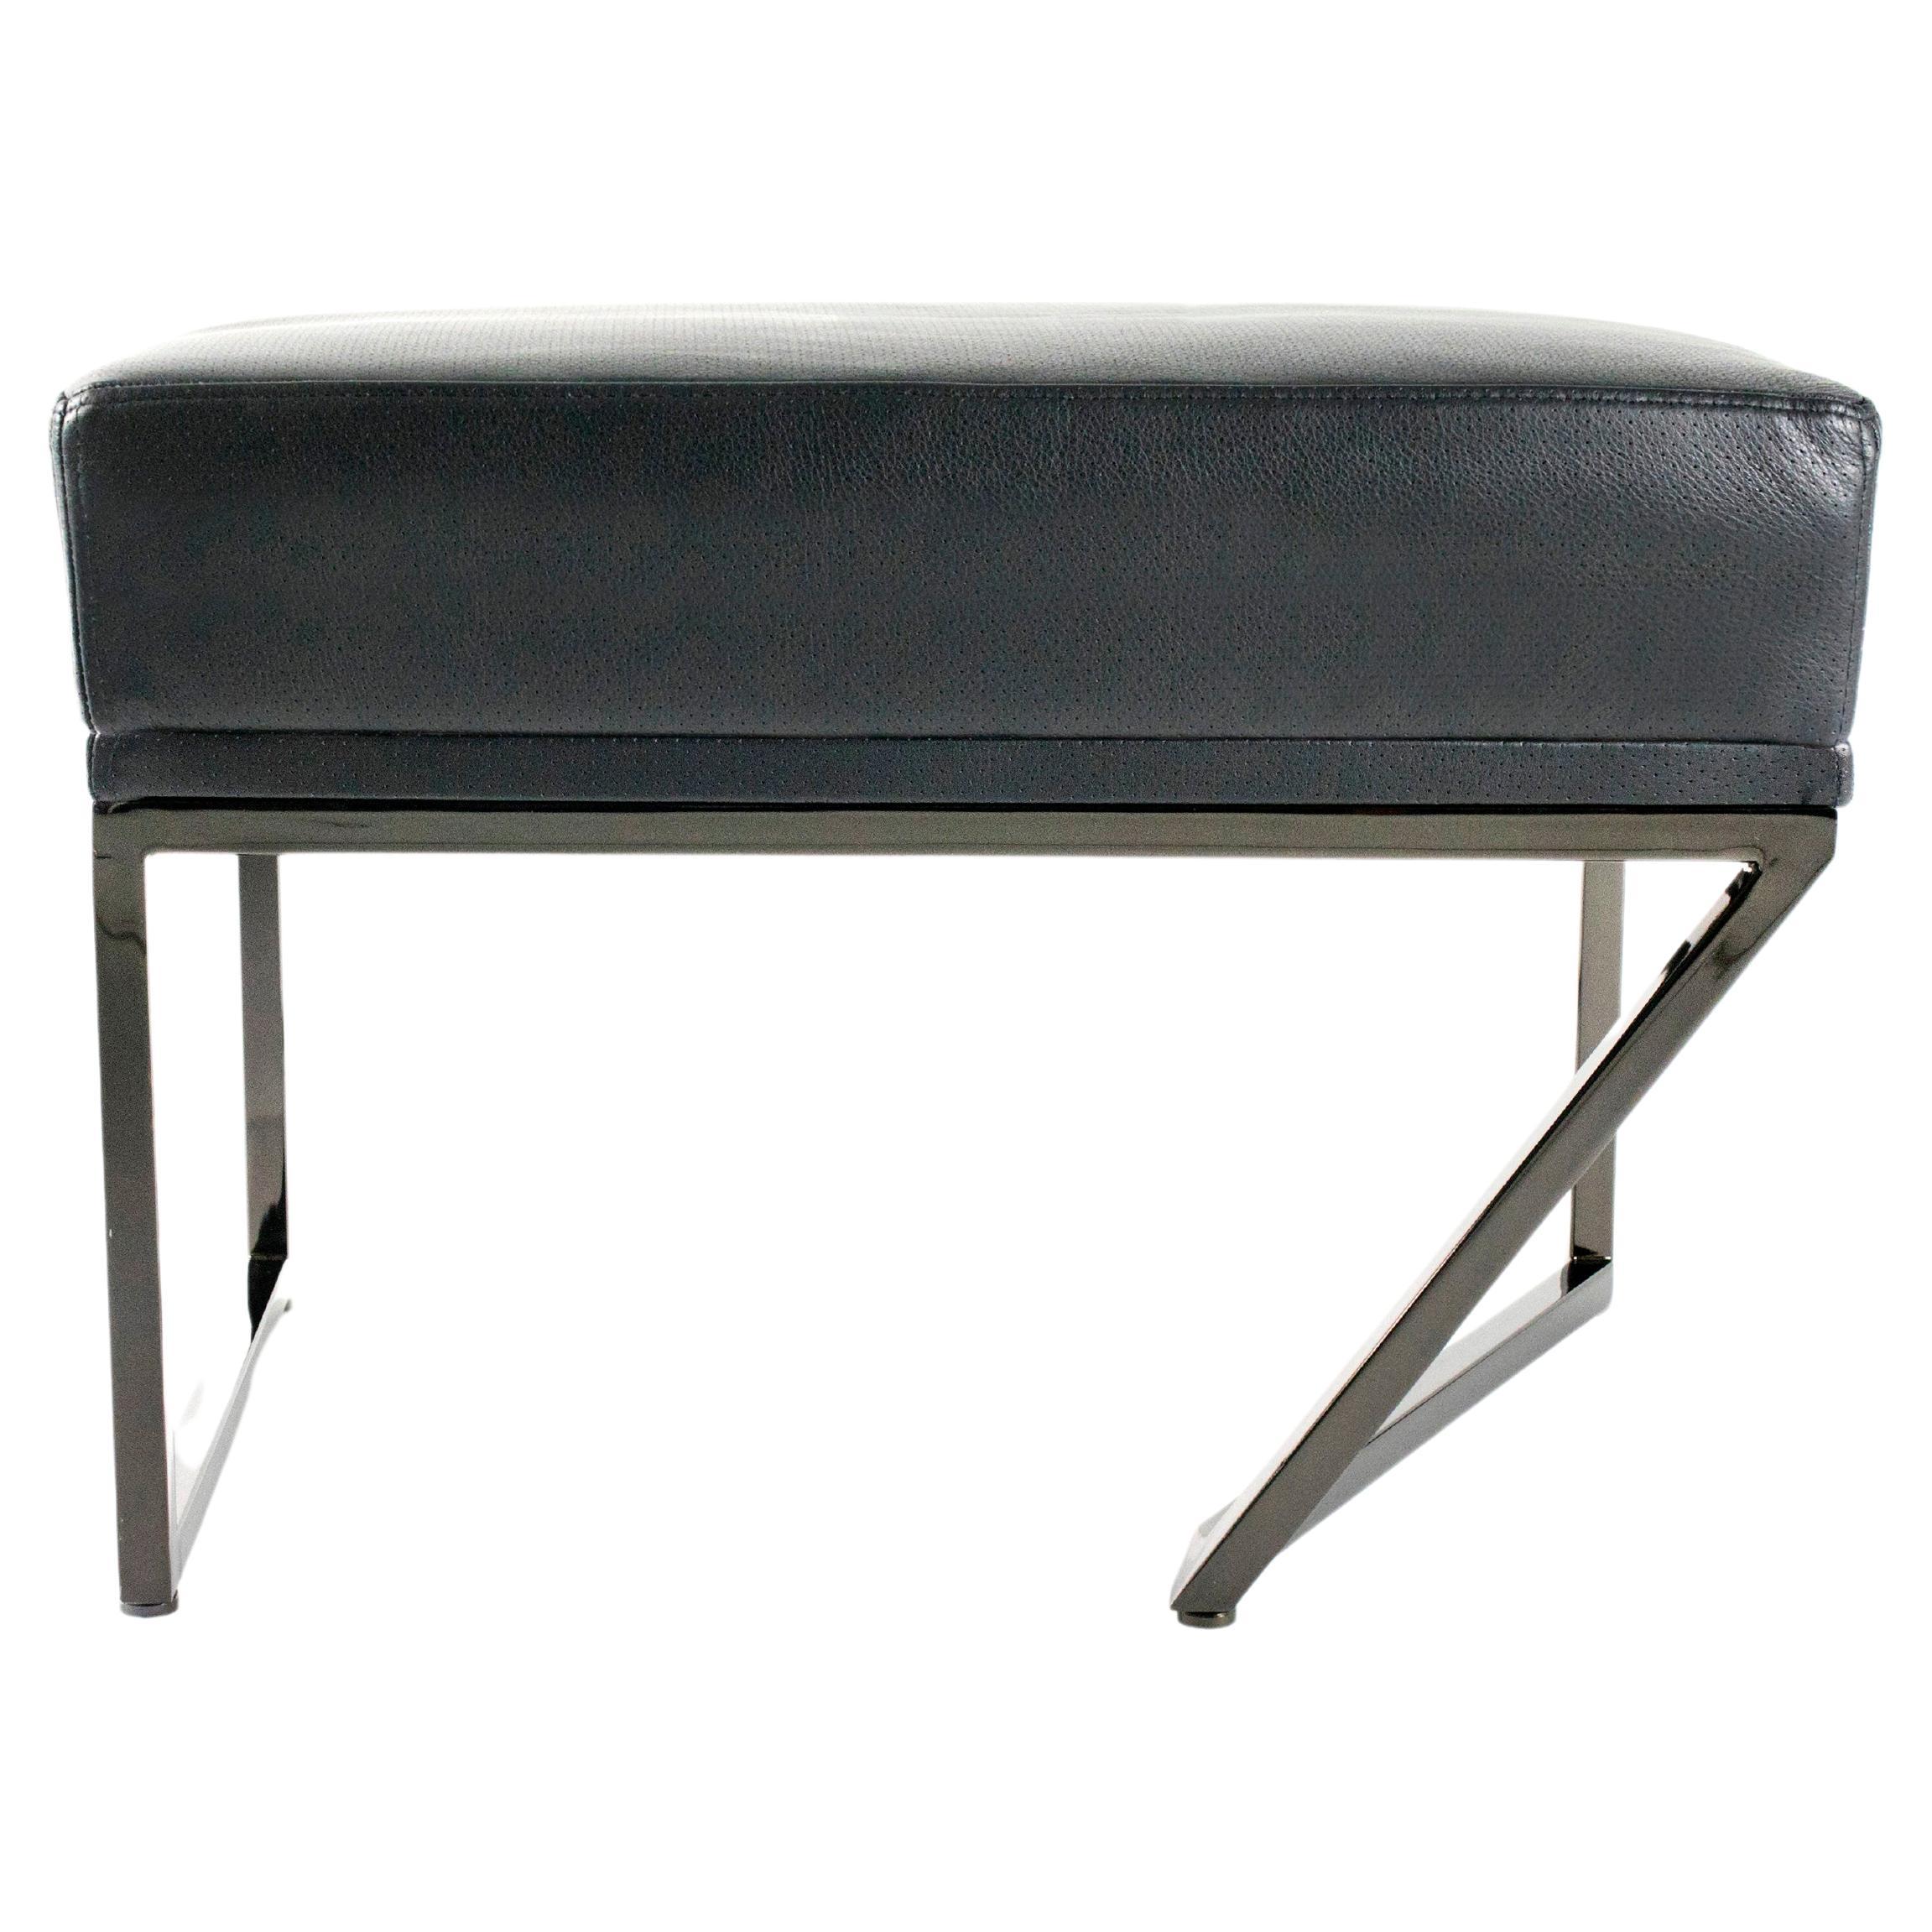 Upholstered Bench Black Nickel Plated